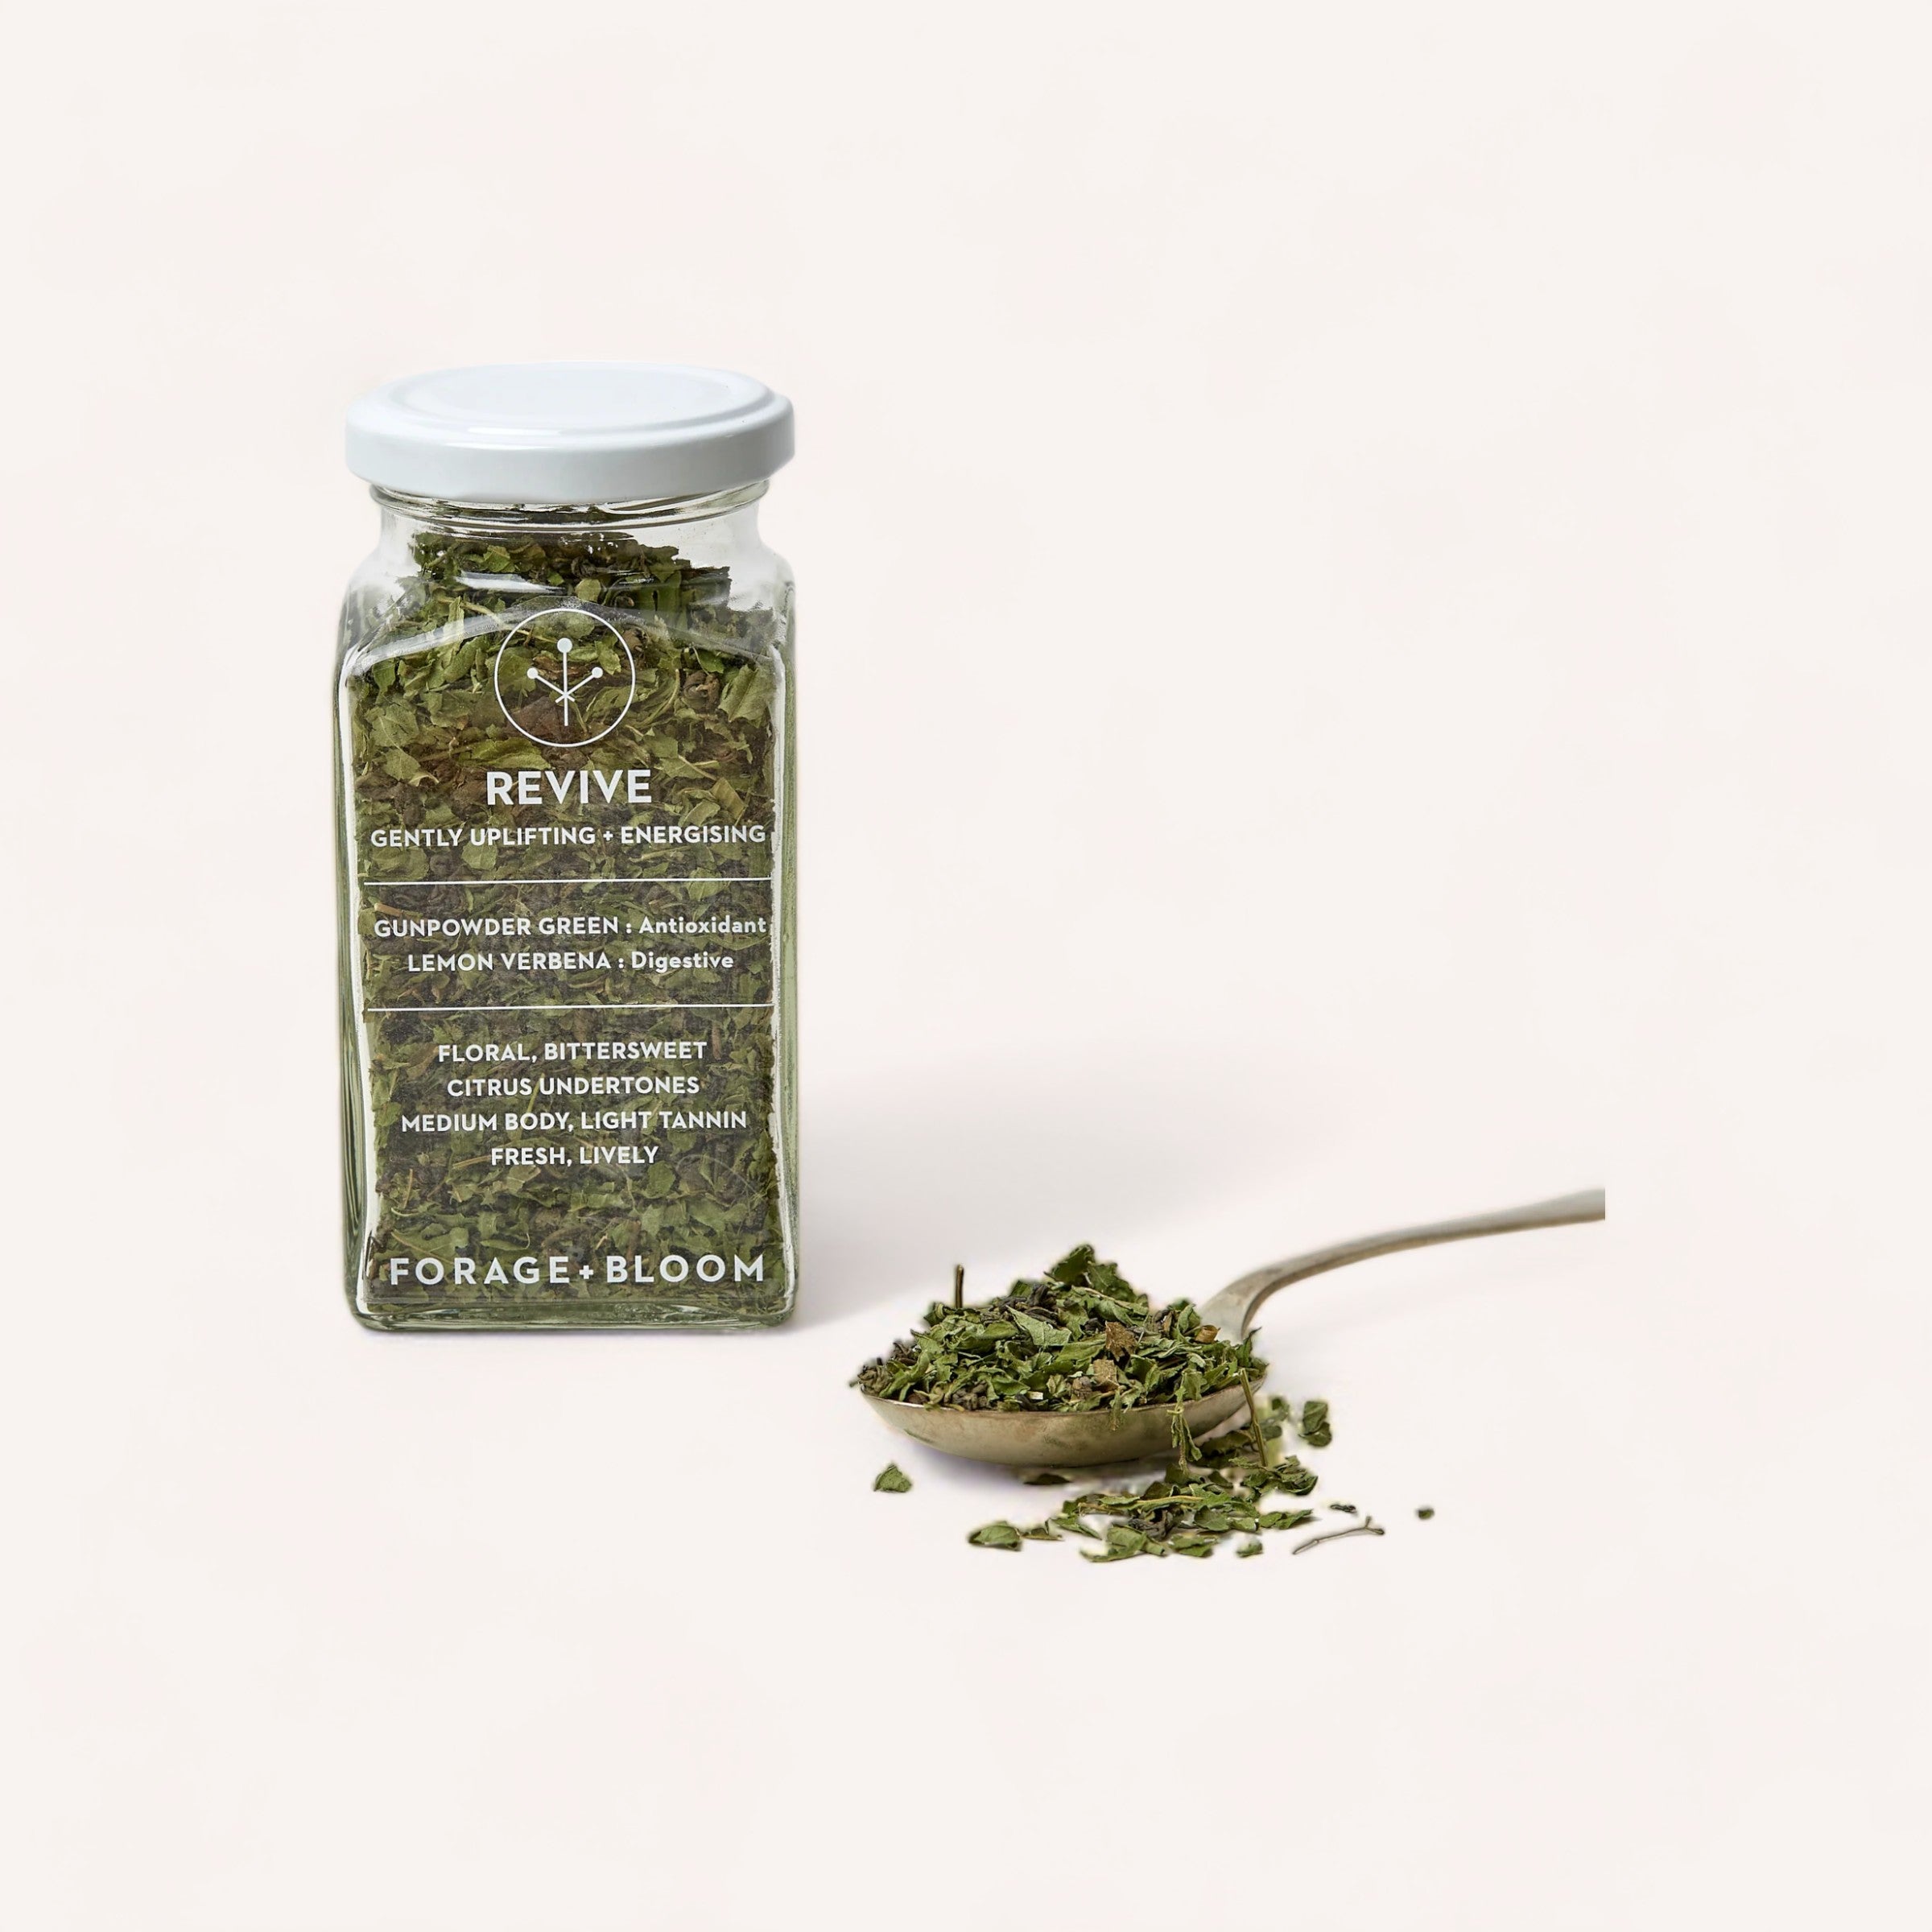 Jar of 'Revive Tea by Forage + Bloom' loose green tea leaves, known for its antioxidant properties, with a scattered pile of leaves beside it on a white background.